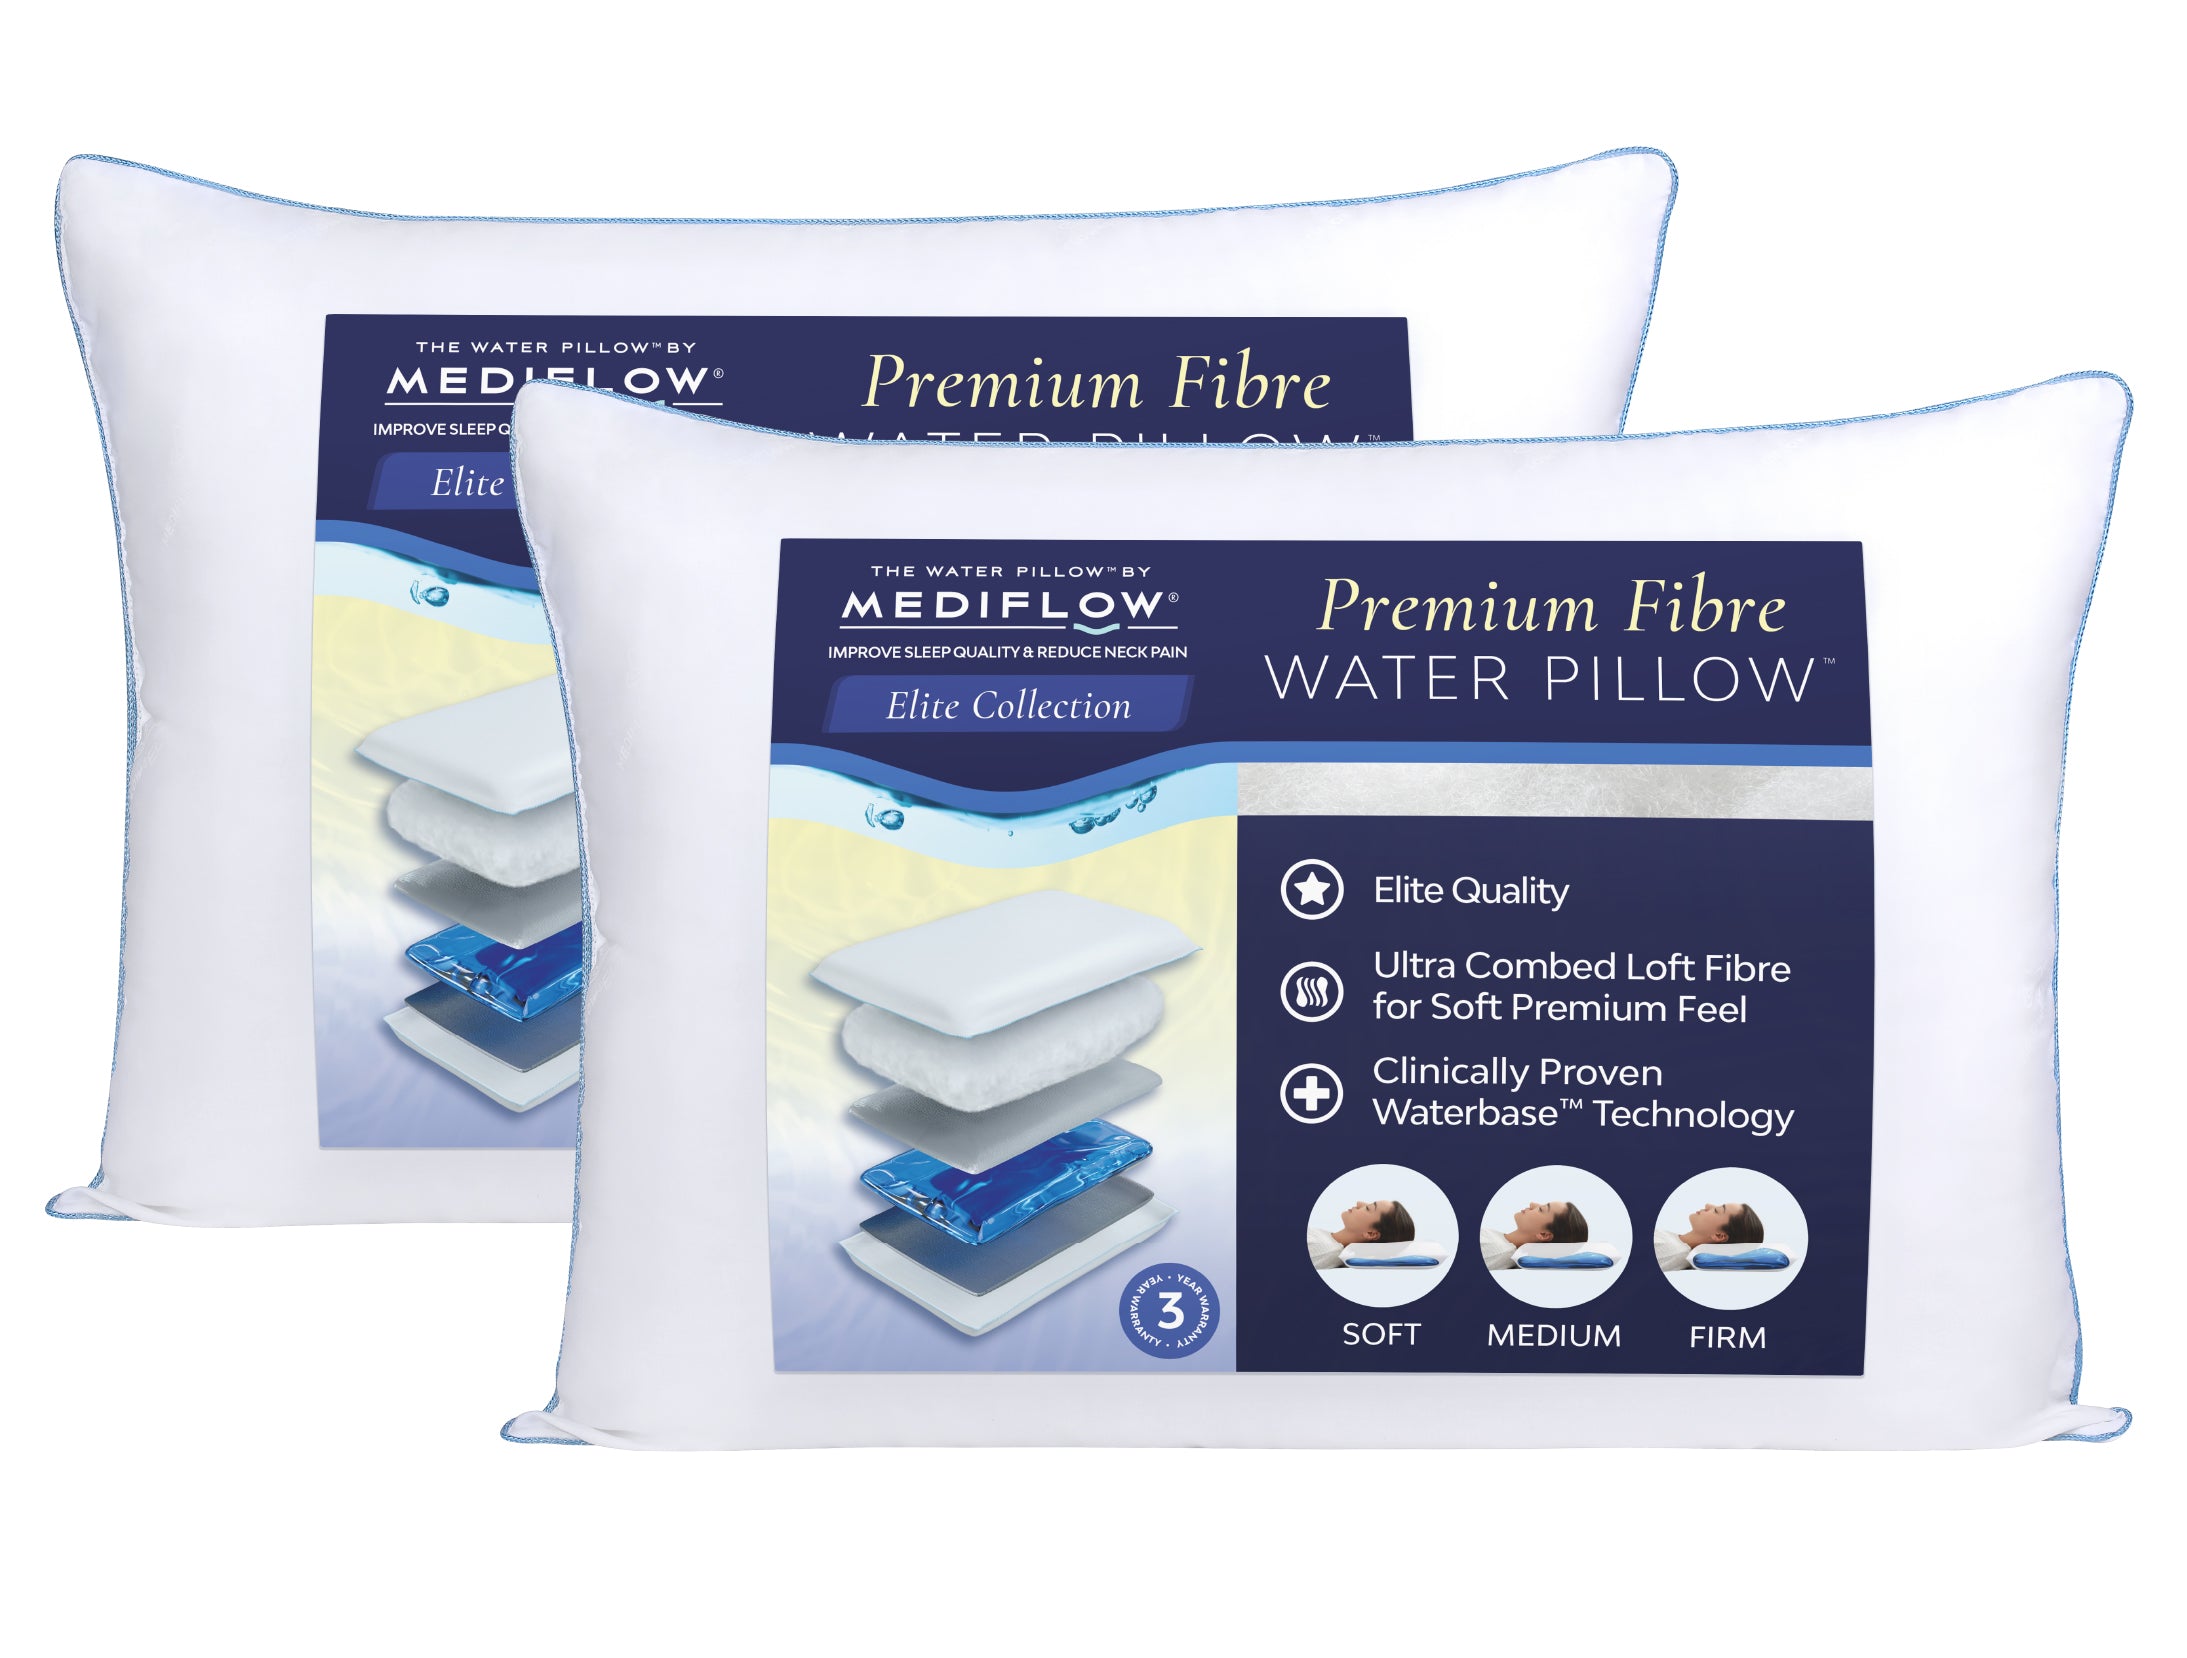 The Water Pillow by Mediflow Elite Fibre | Reduces neck pain and